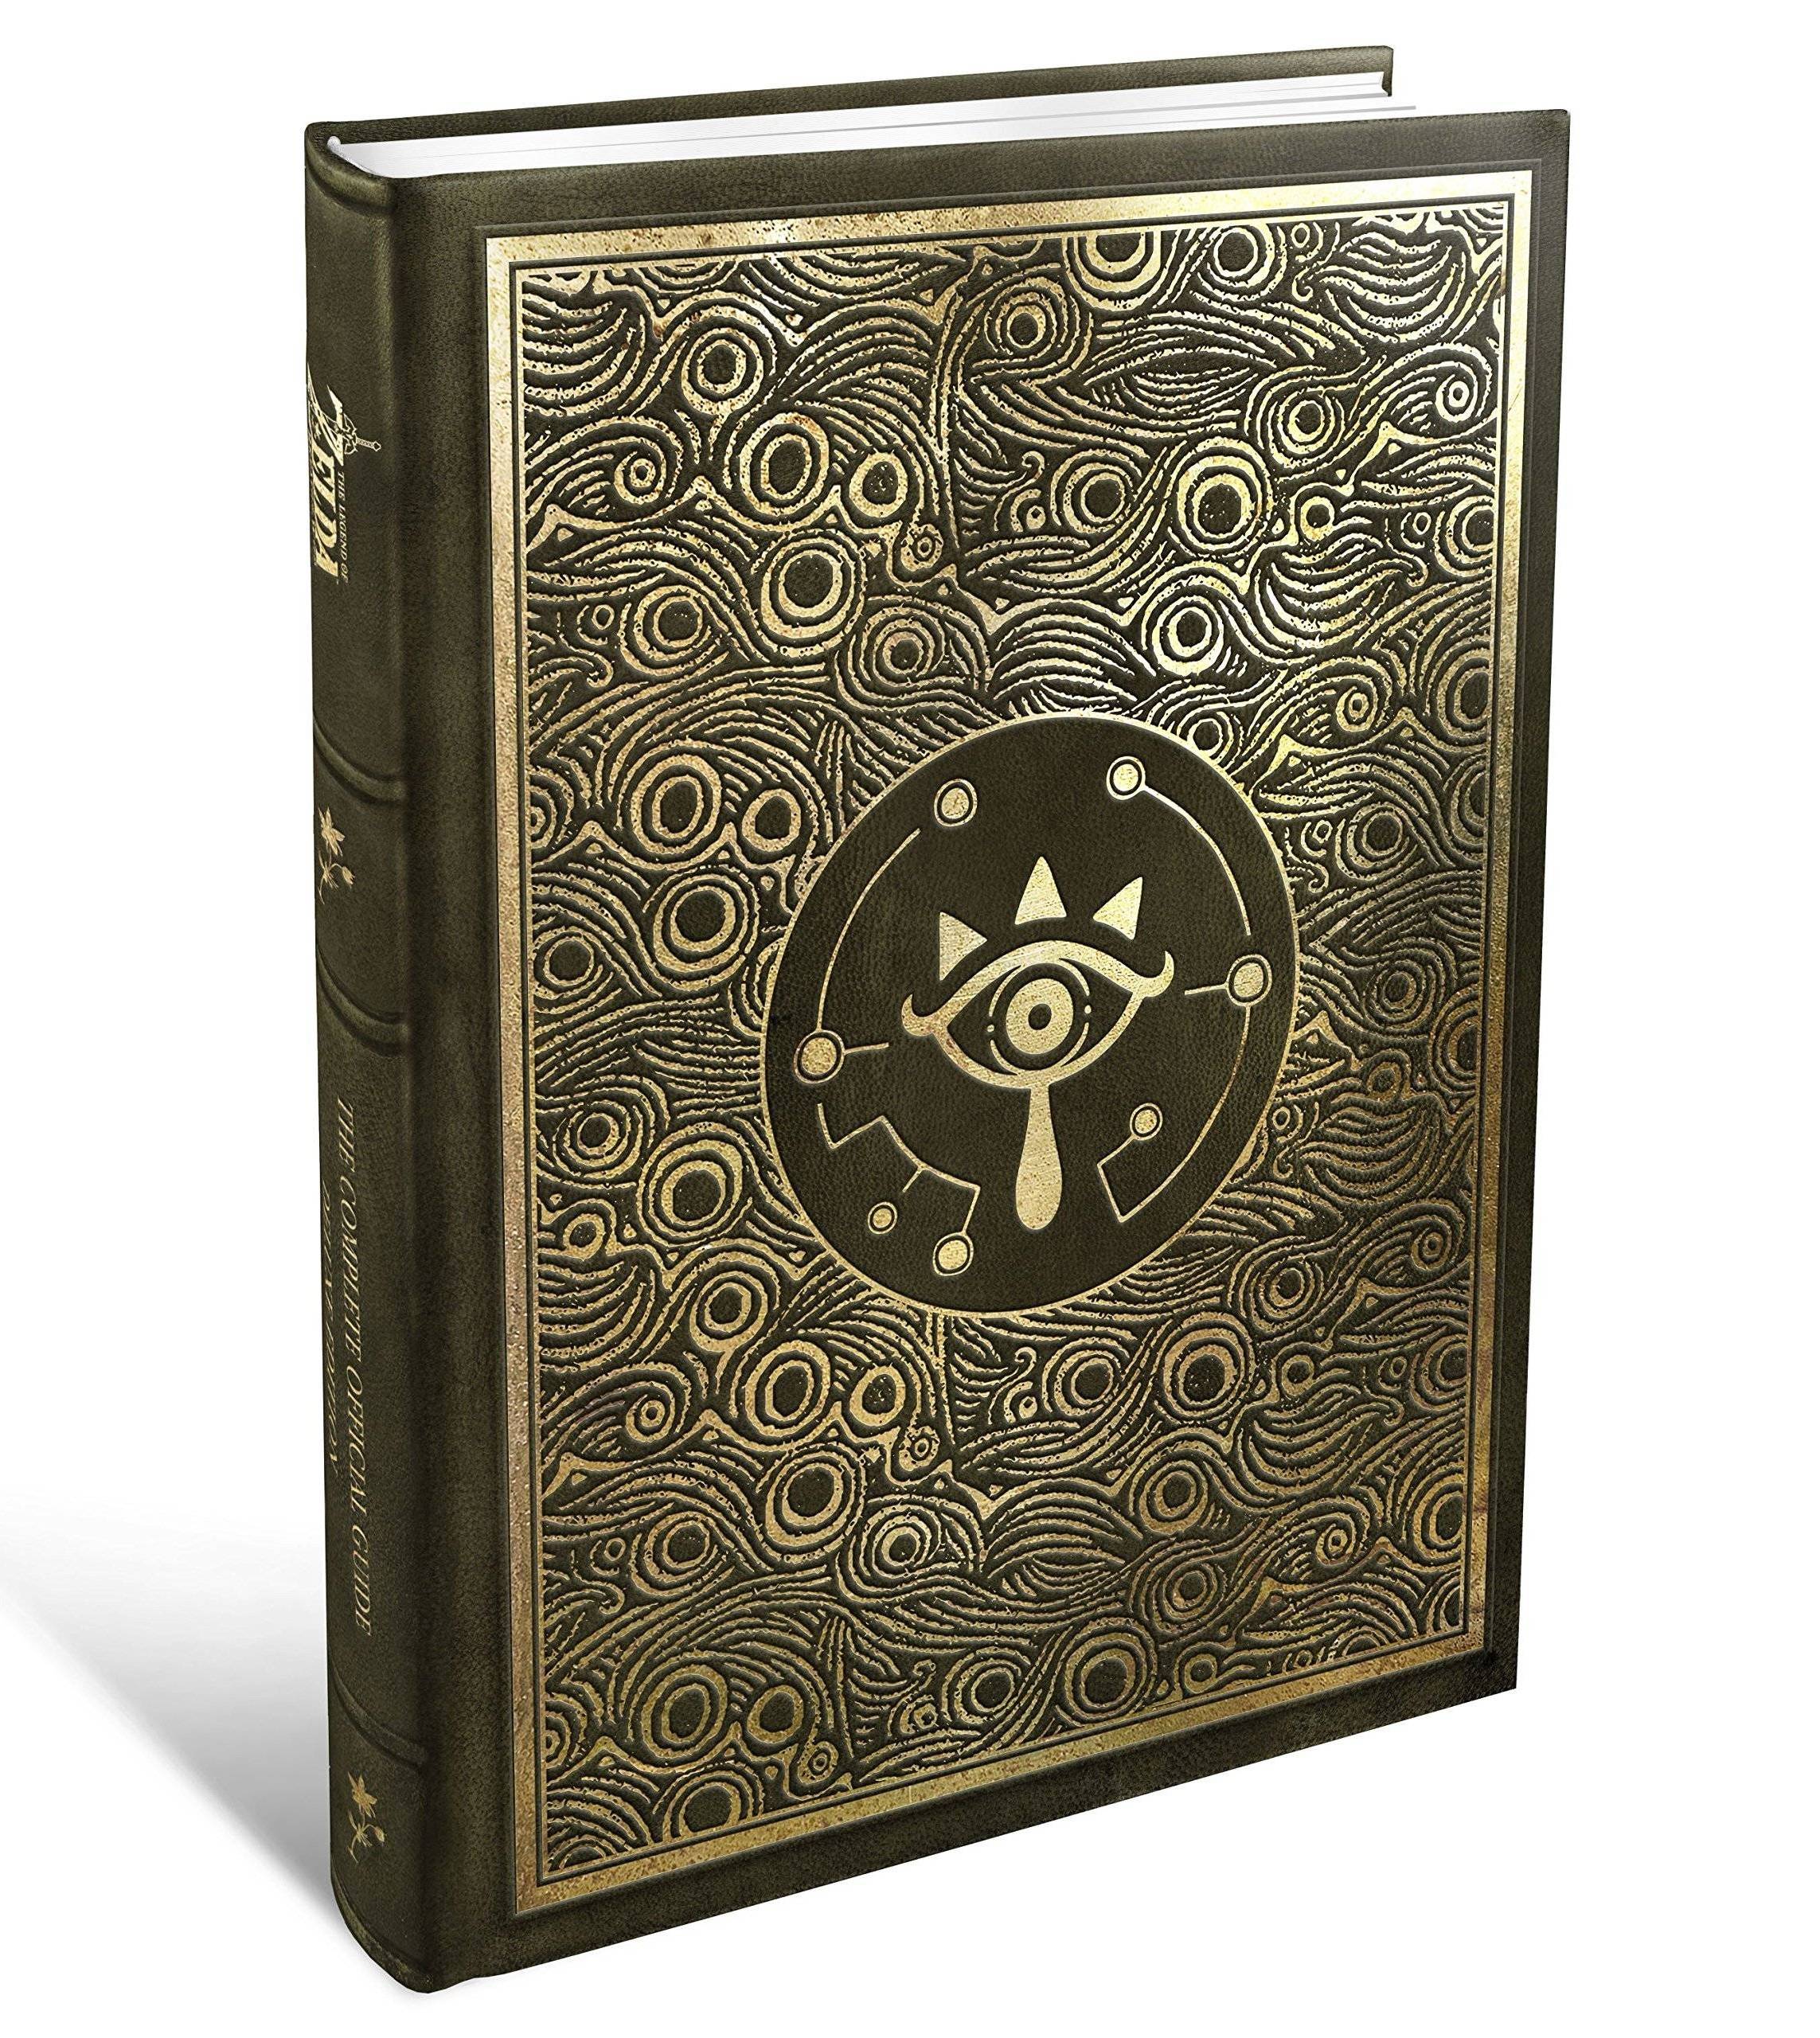 Legend of Zelda: Breath of the Wild Deluxe Edition Complete Guide (Pre-Order)  $48 + Free Shipping